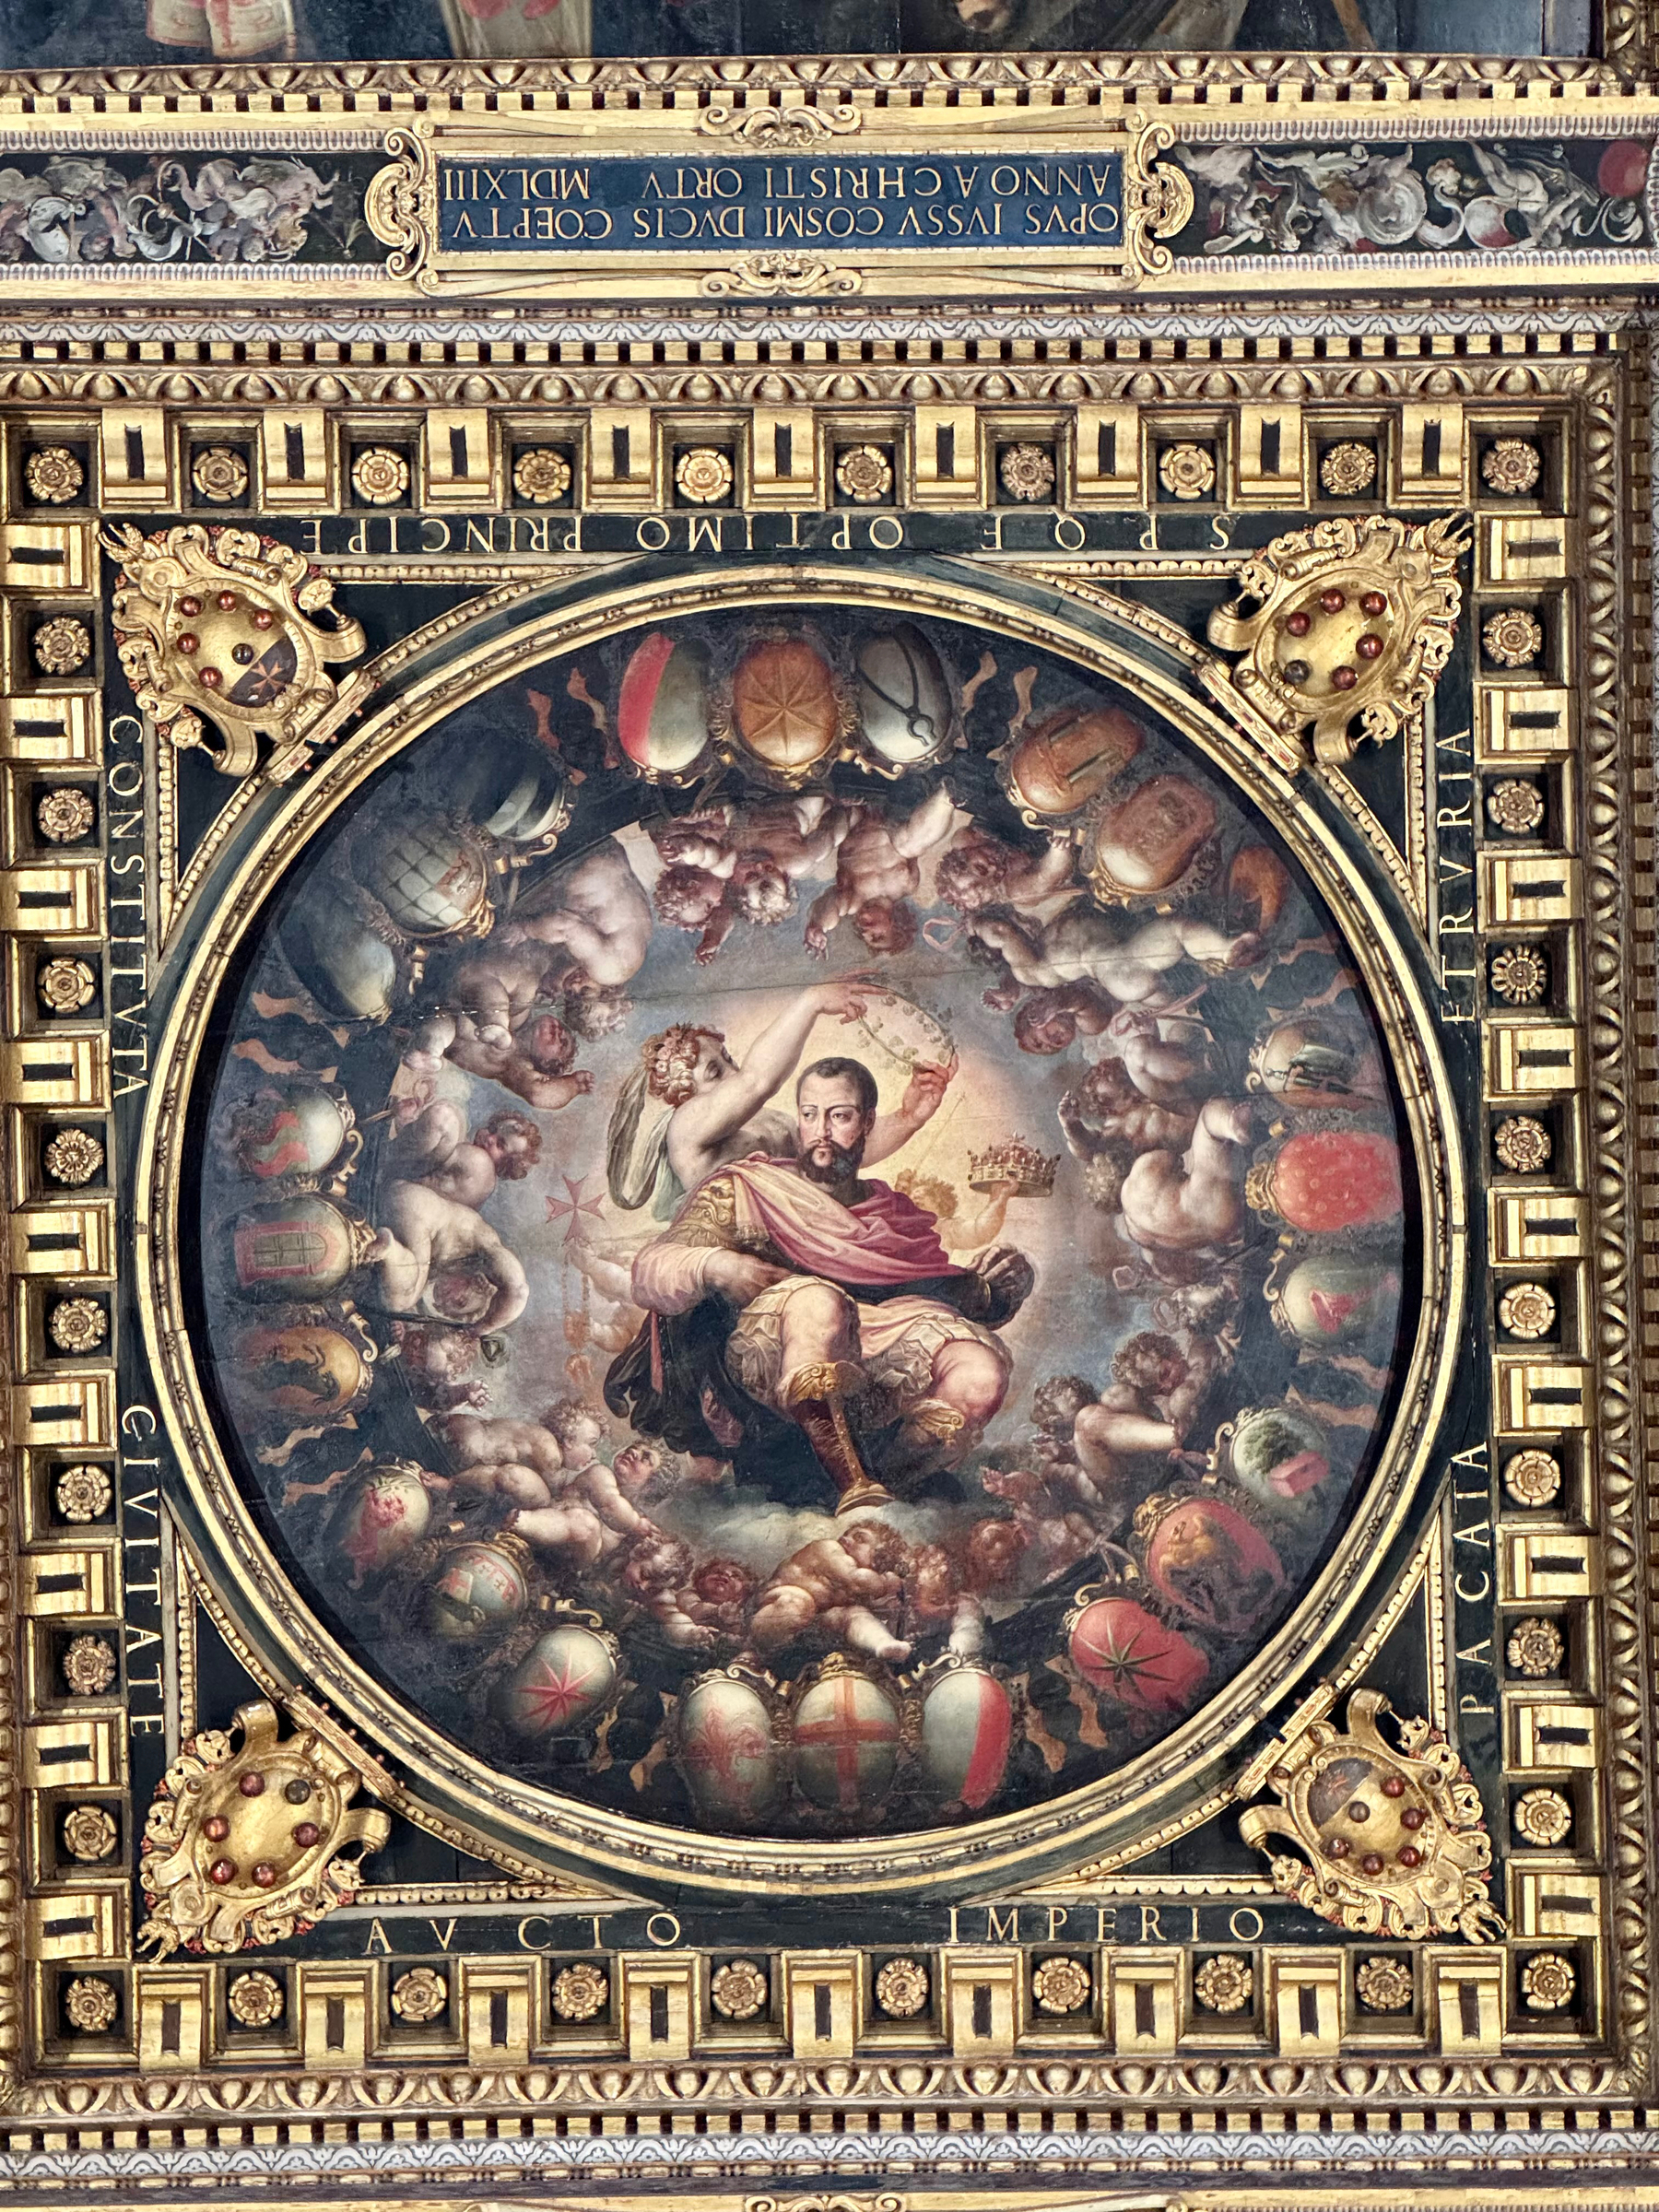 Ornate ceiling painting framed with intricate gold detailing. The central circular painting depicts a regal figure holding a crown, surrounded by cherubs and shields. Latin inscriptions adorn the frame.